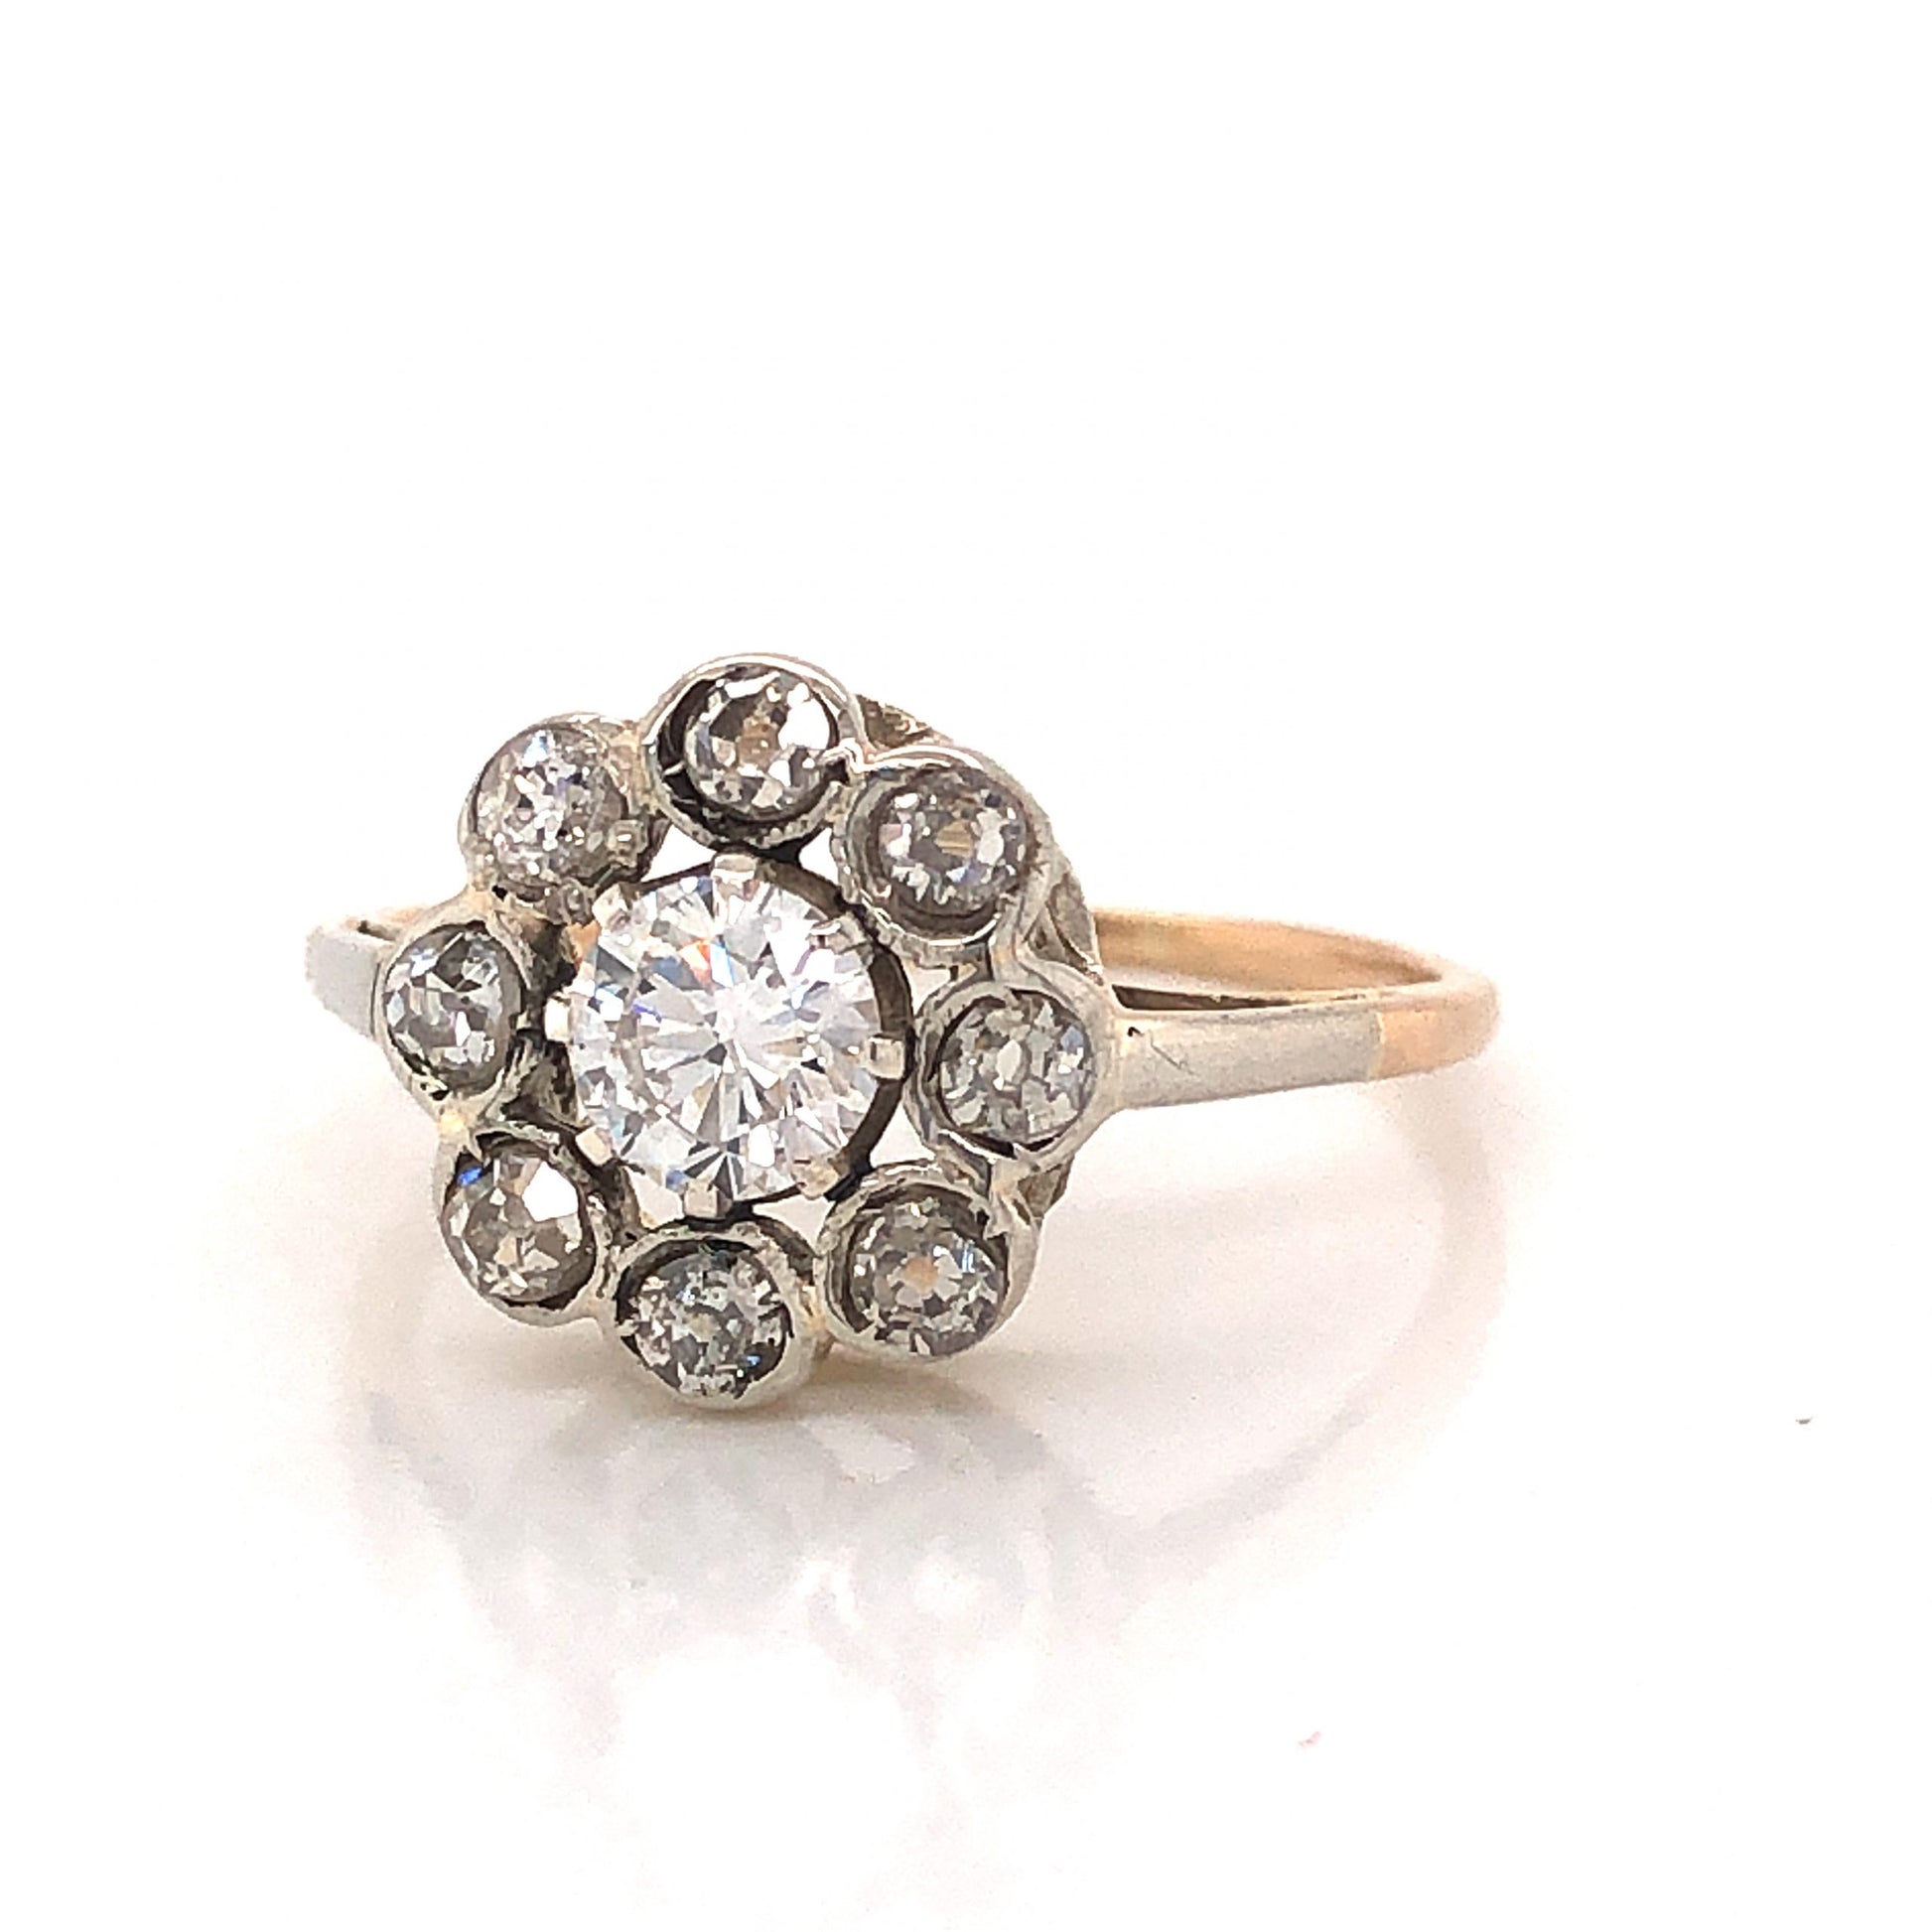 Victorian Bezel Set Diamond Cluster Engagement Ring in Silver & 14kComposition: Sterling Silver/14 Karat Yellow Gold Ring Size: 6 Total Diamond Weight: .78ct Total Gram Weight: 1.8 g